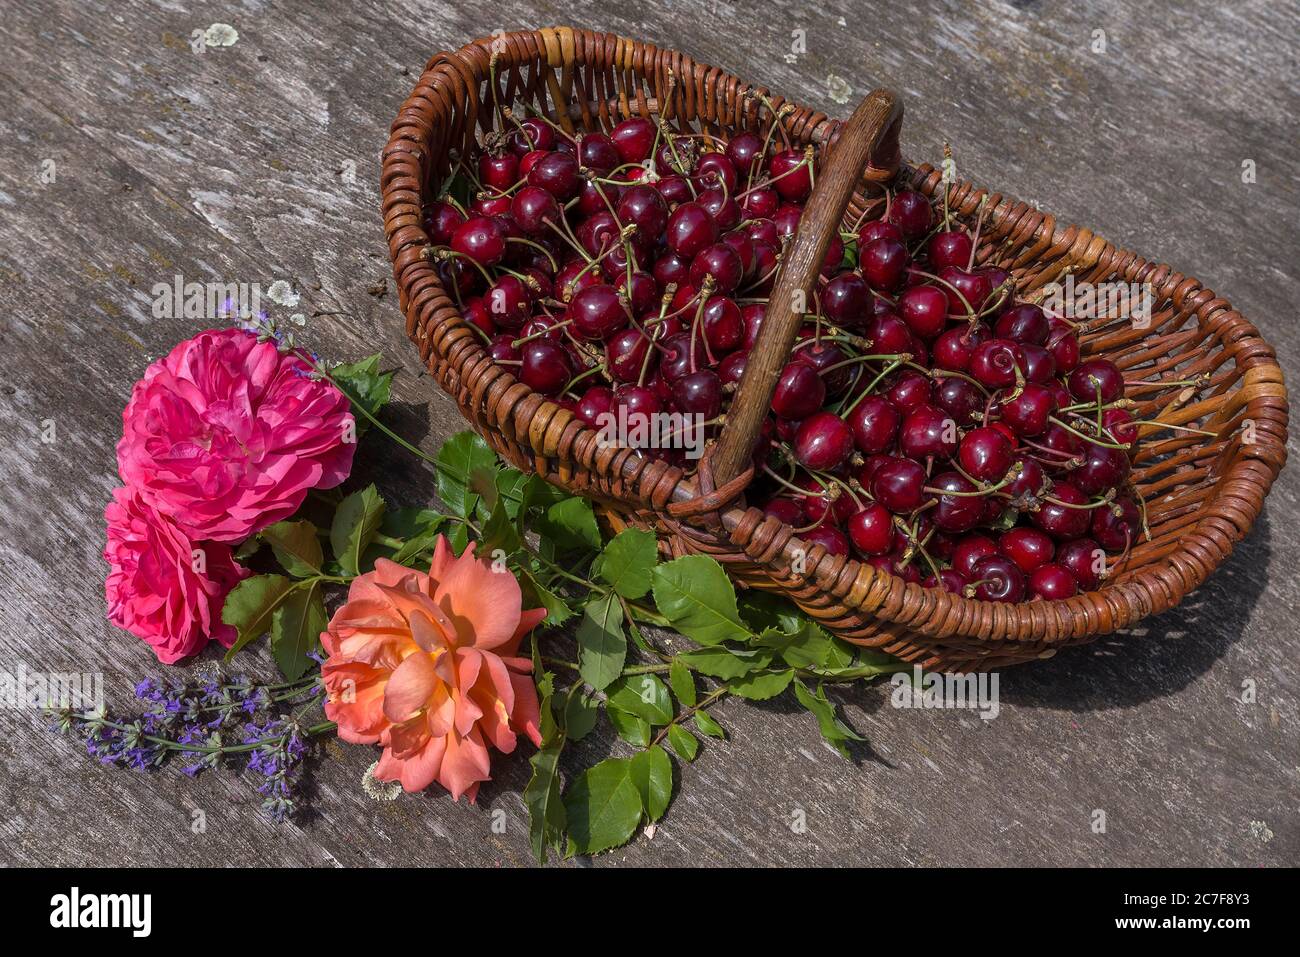 Freshly picked cherries in a basket with rose petals, Bavaria, Germany Stock Photo